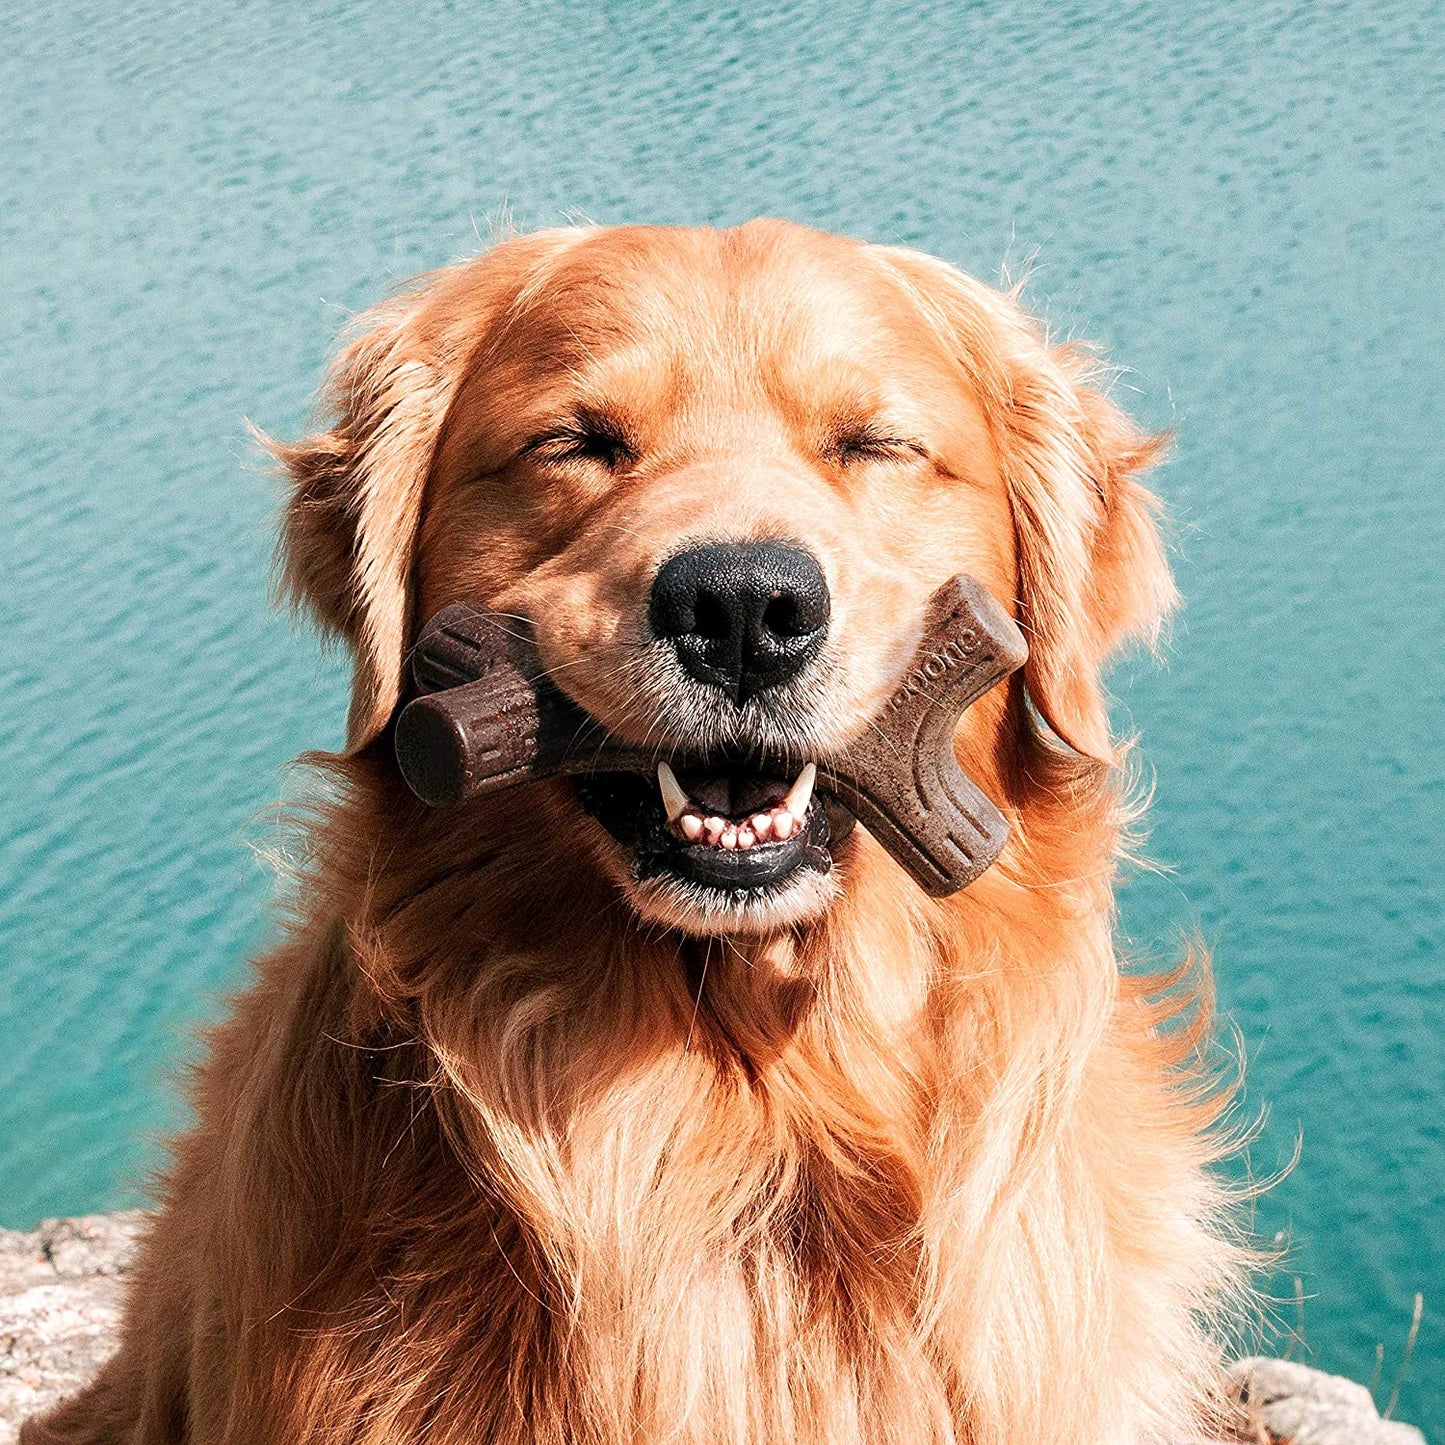 A brown dog has a bacon chew toy in his mouth. A dog appears to be grinning and happy.